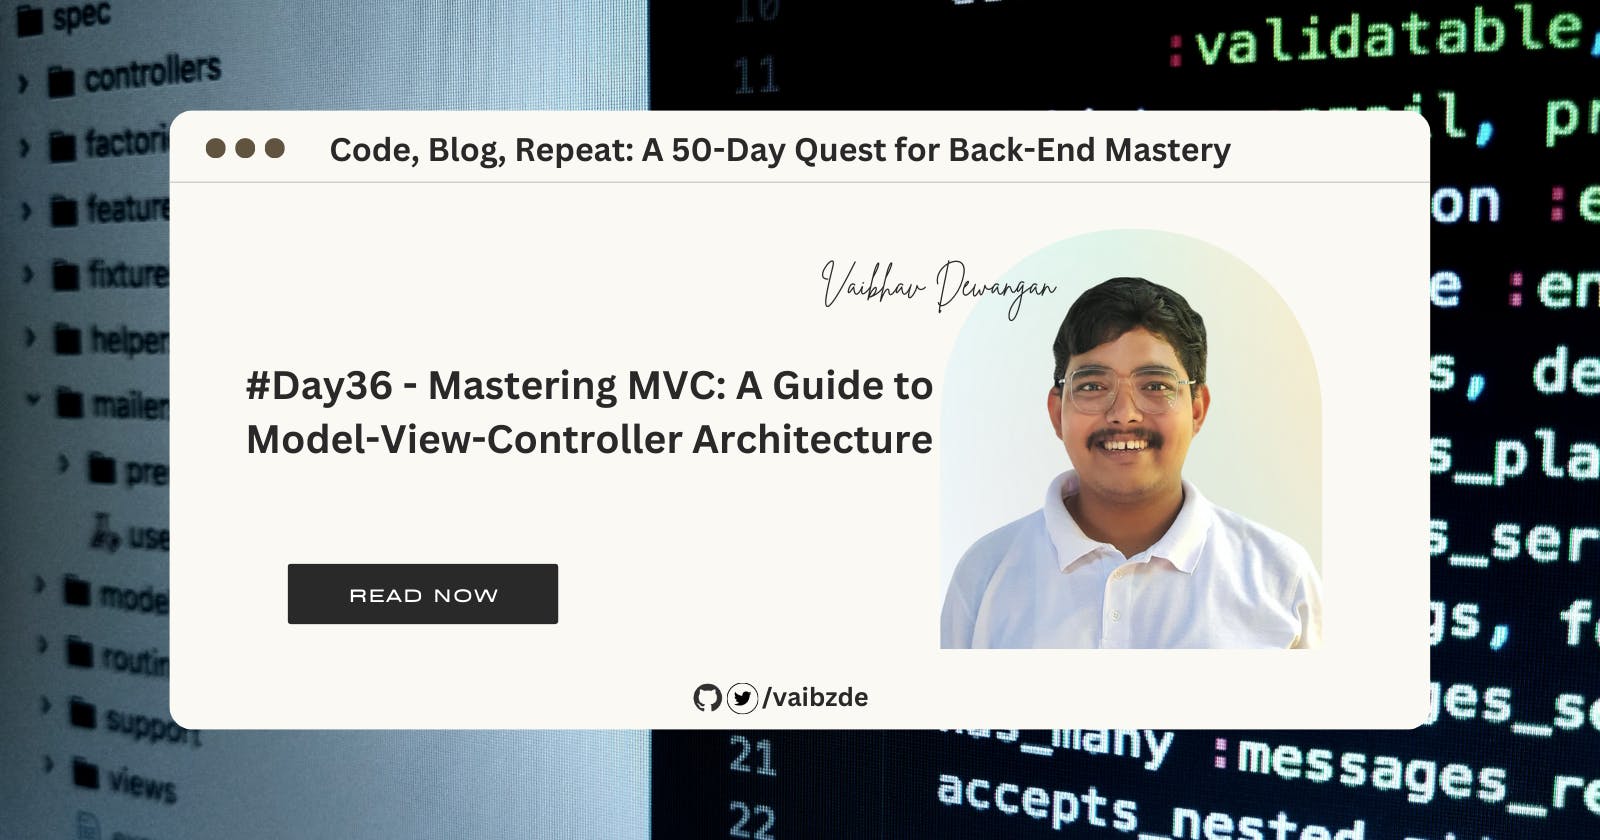 #Day36 - Mastering MVC: A Guide to Model-View-Controller Architecture